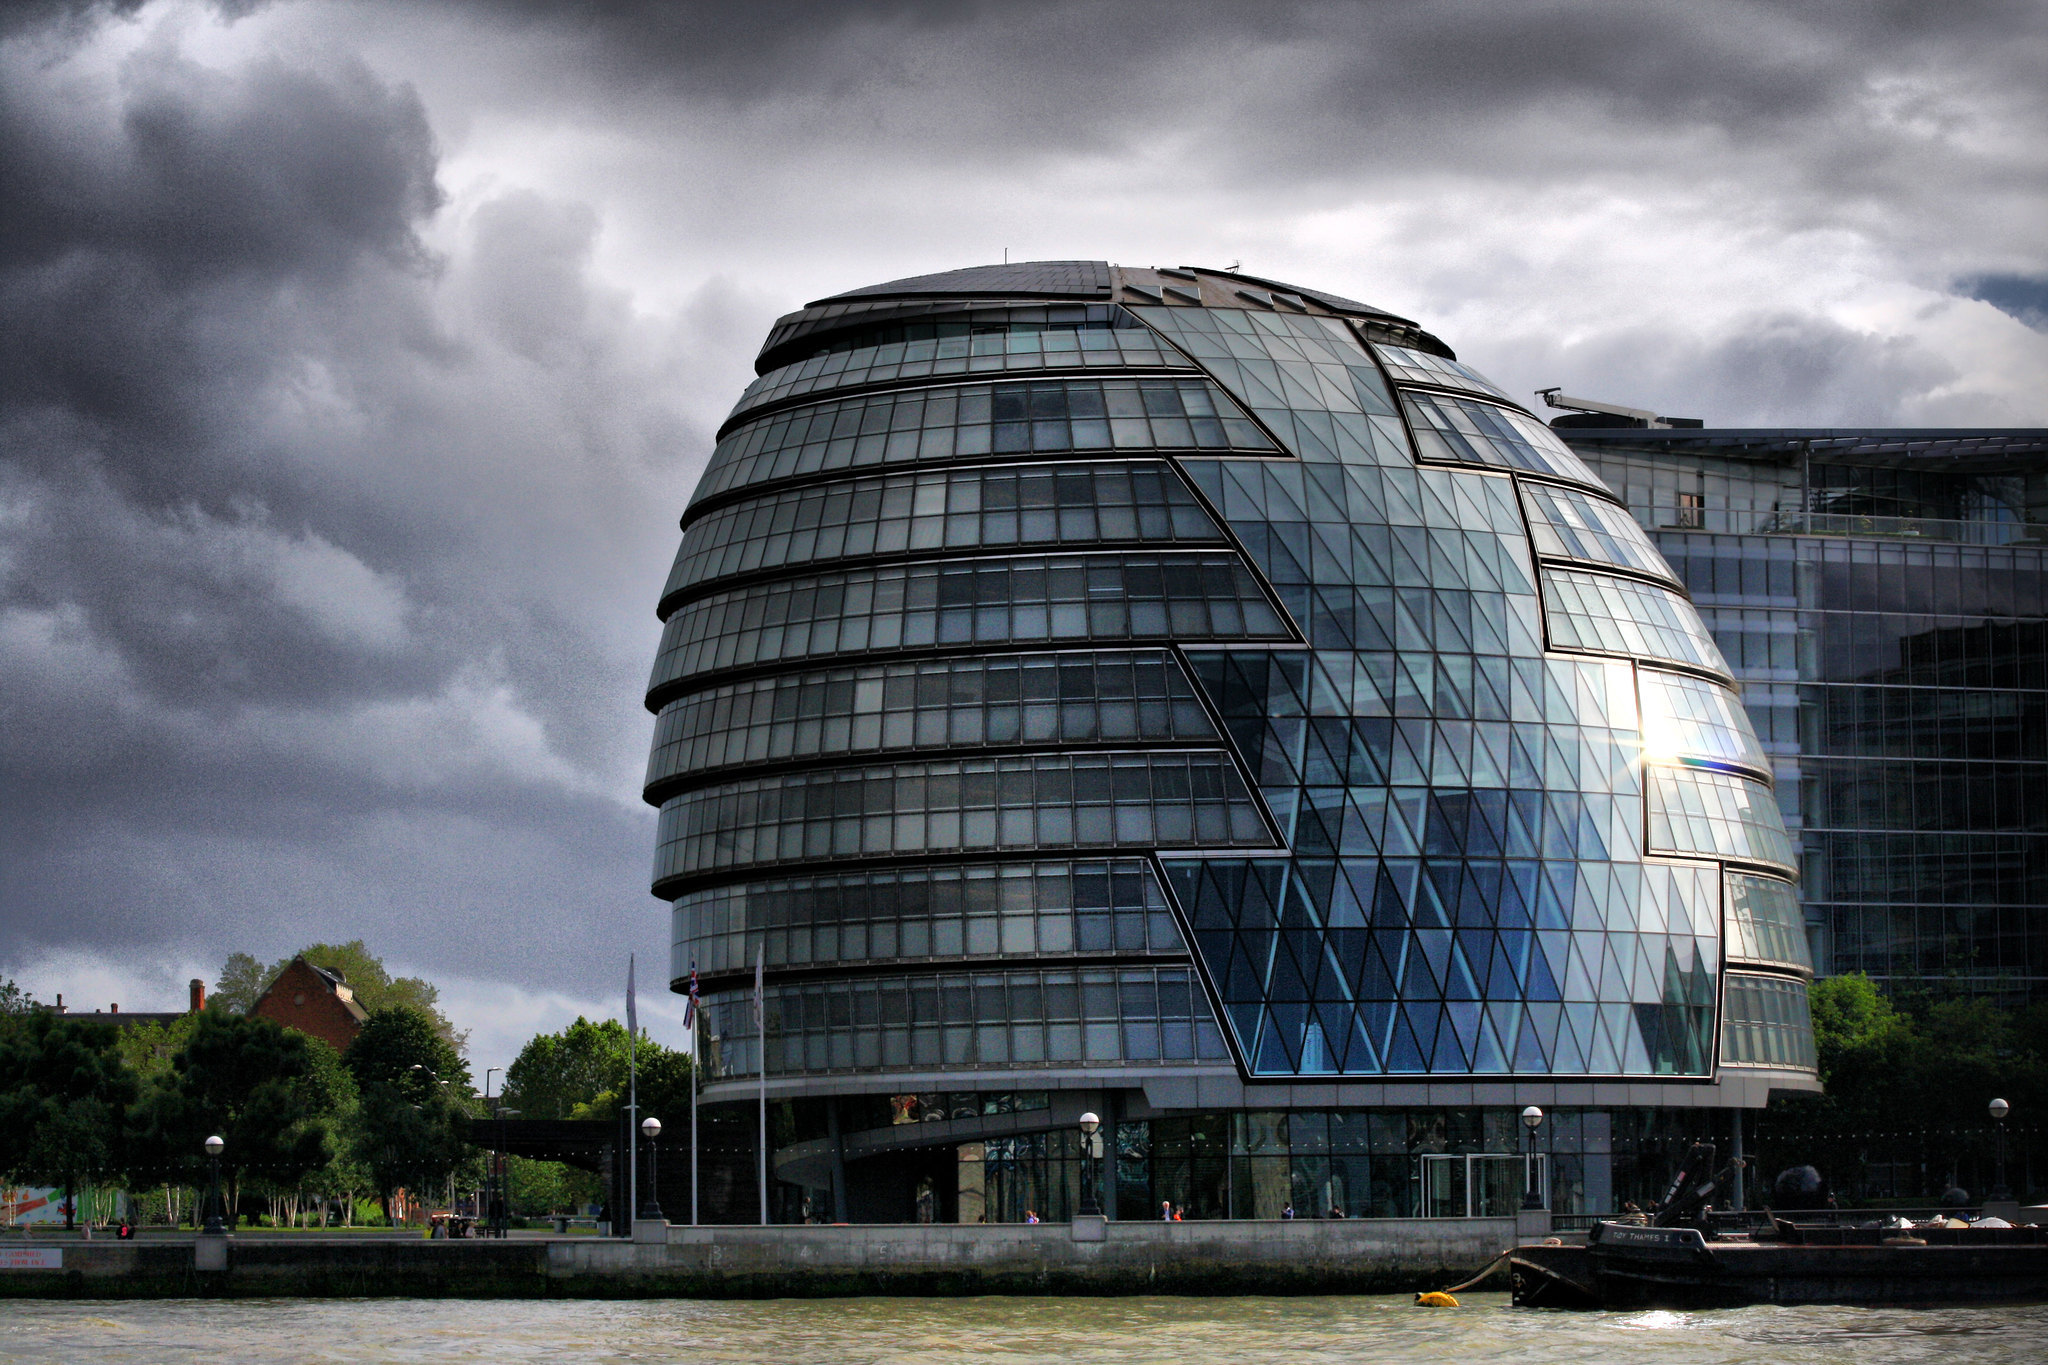 a bulbous governmental building in london designed by foster + partners